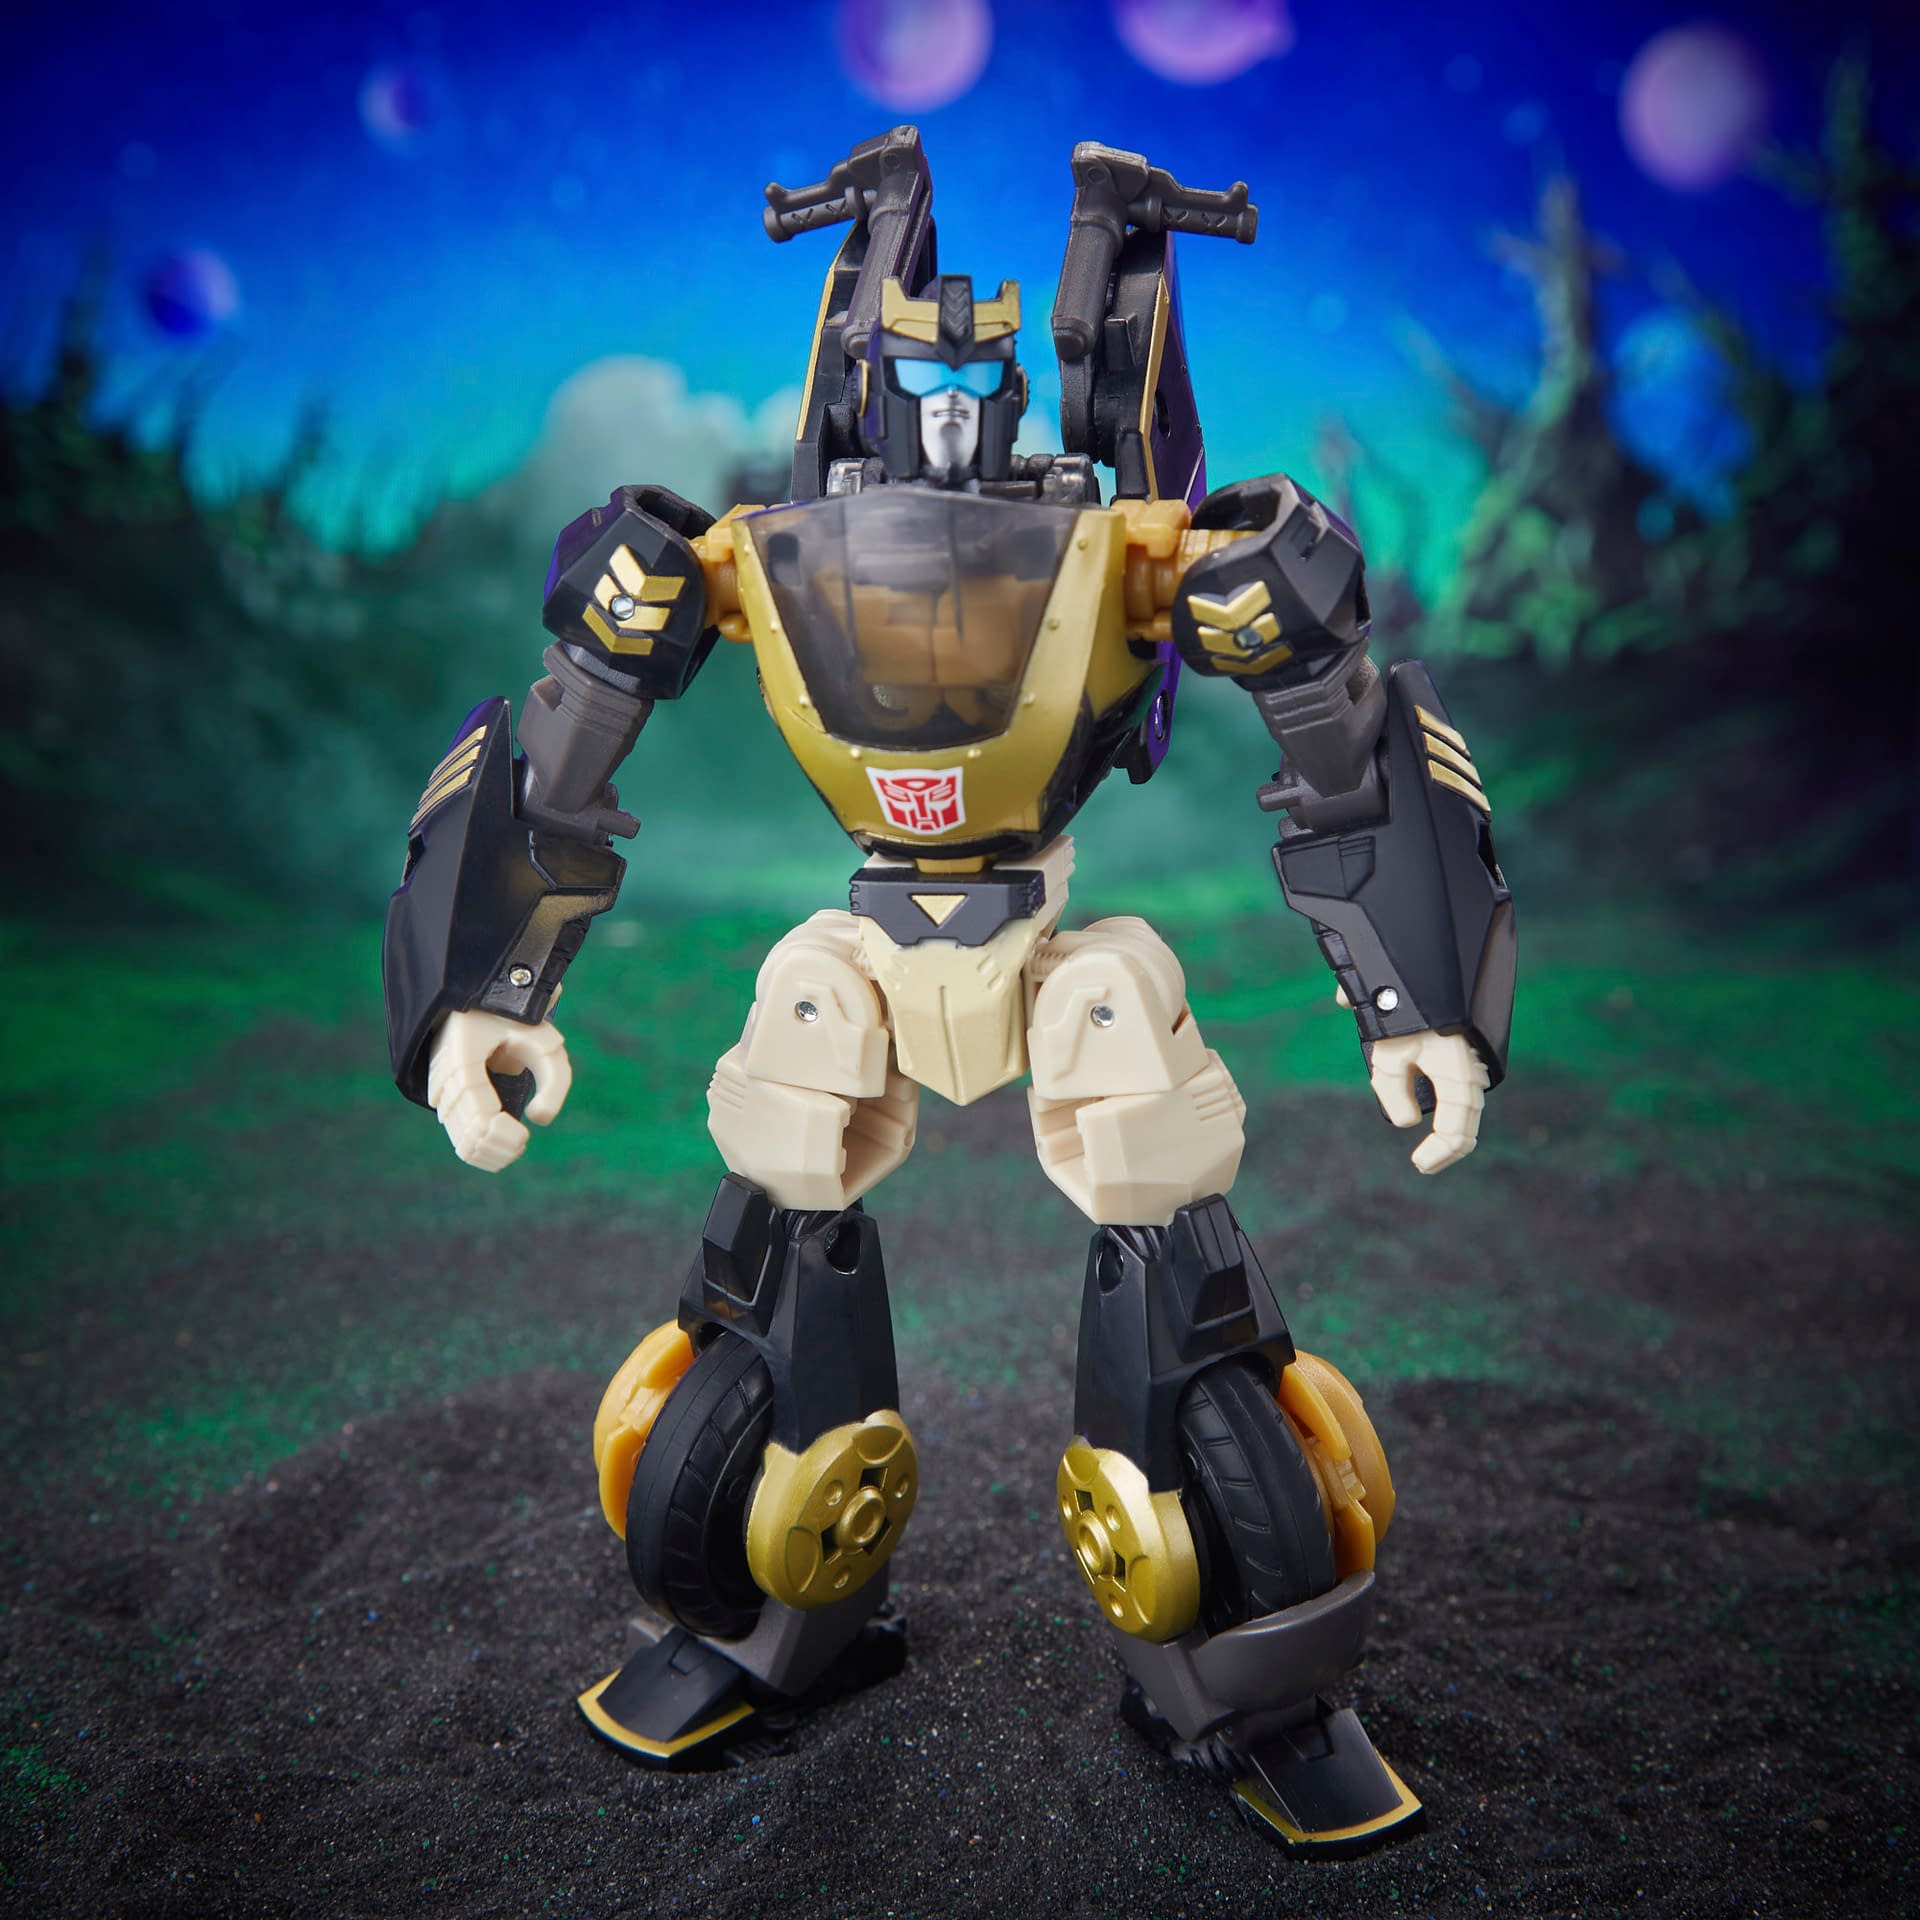 New Animated Transformers Legacy Figures Unveiled from Hasbro 